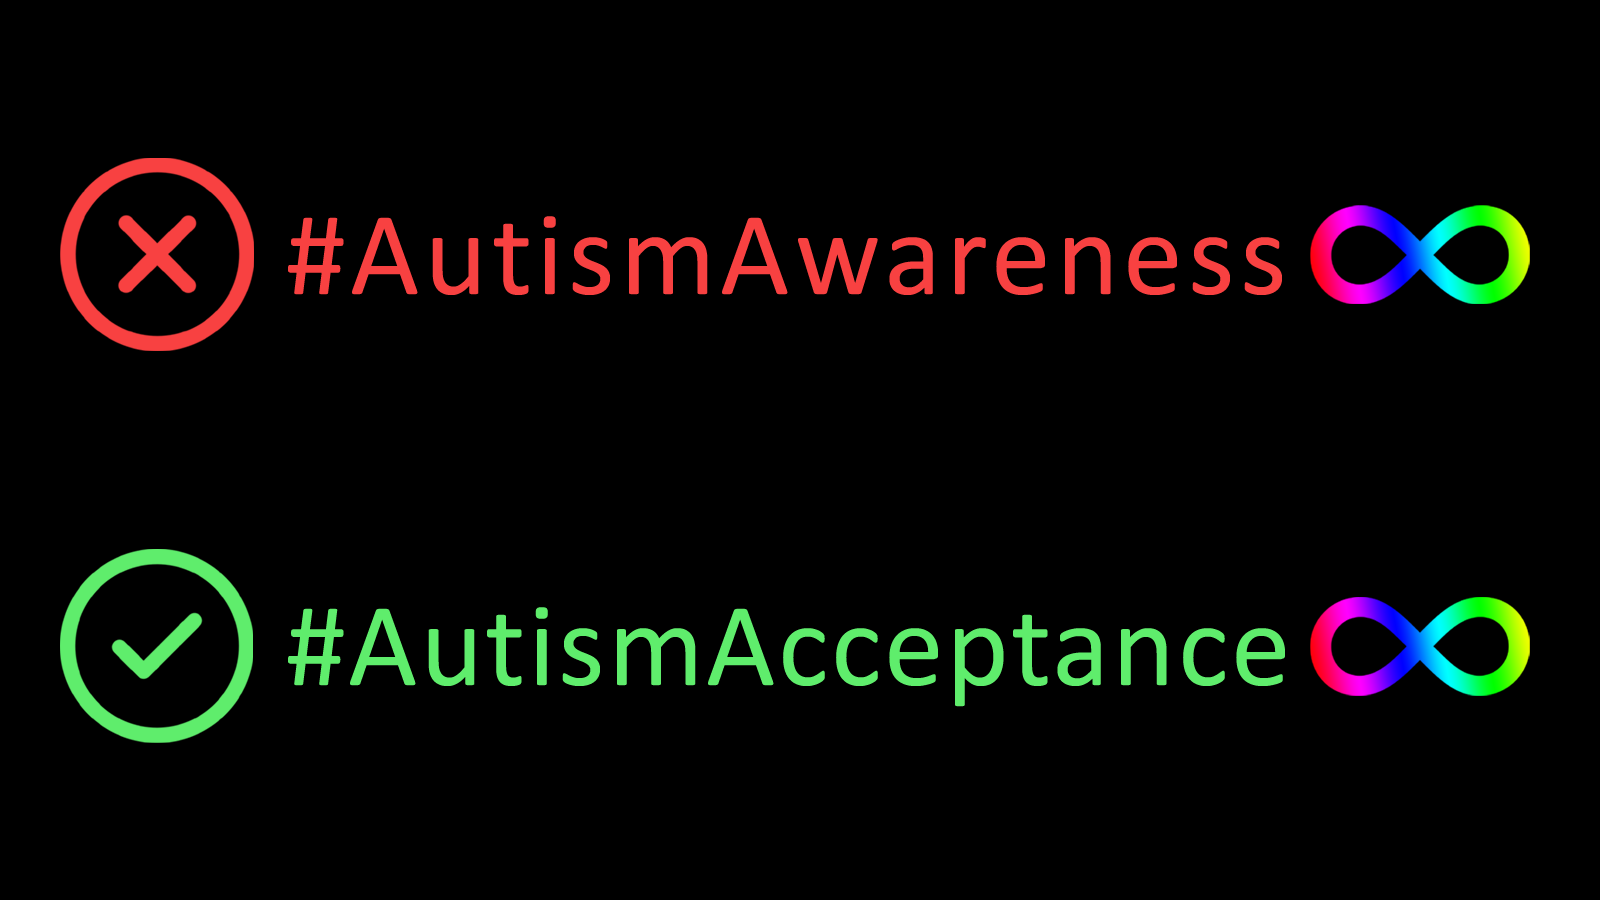 Black background. In the top half a red X and "#AutismAwareness" with a rainbow infinity symbol next to it. In the bottom half a green checkmark and "#AutismAcceptance" with a rainbow infinity symbol next to it.